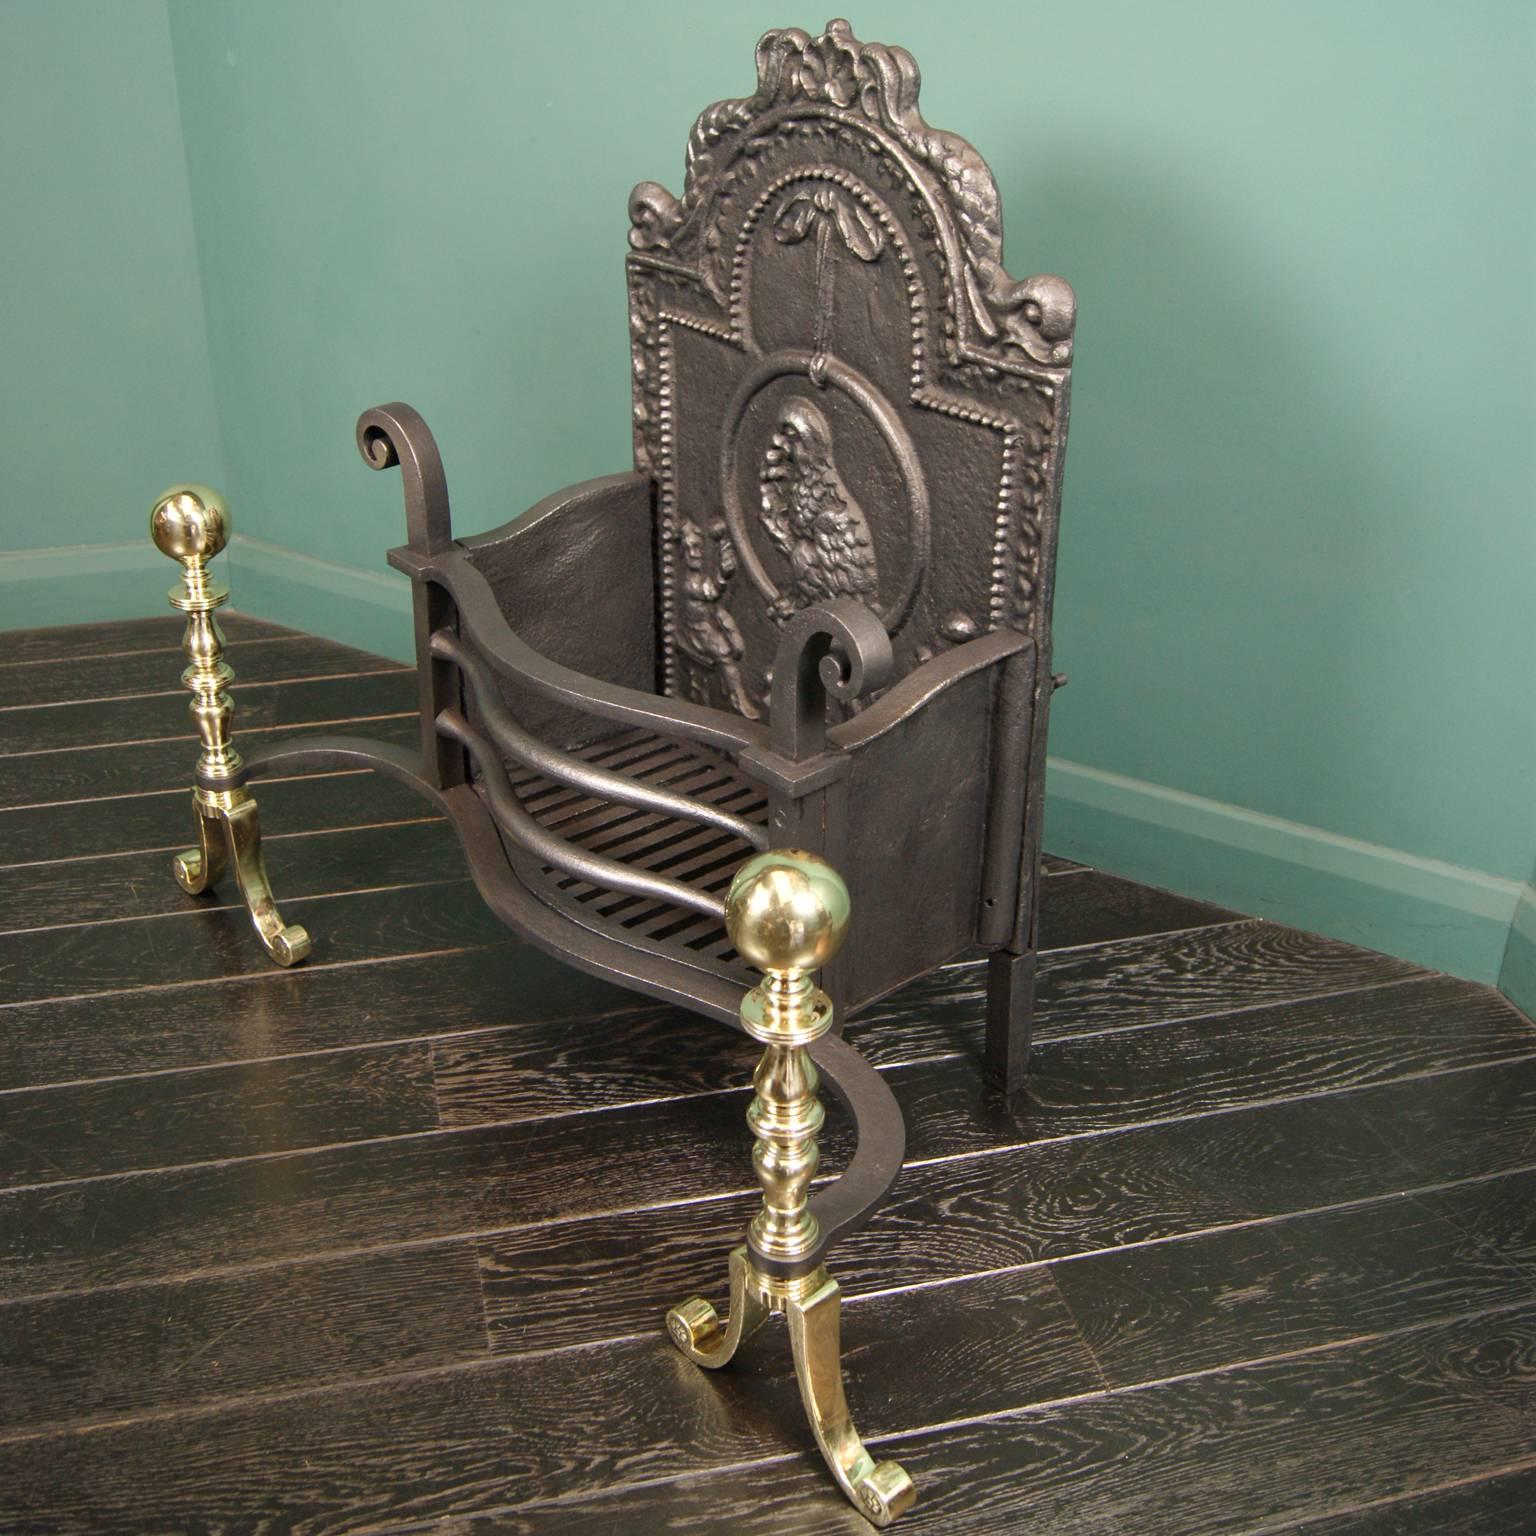 Wrought iron fire basket with scroll finials, shaped round fire bars, polished brass dog legs with ball finials and an ornate fire back depicting a parrot.